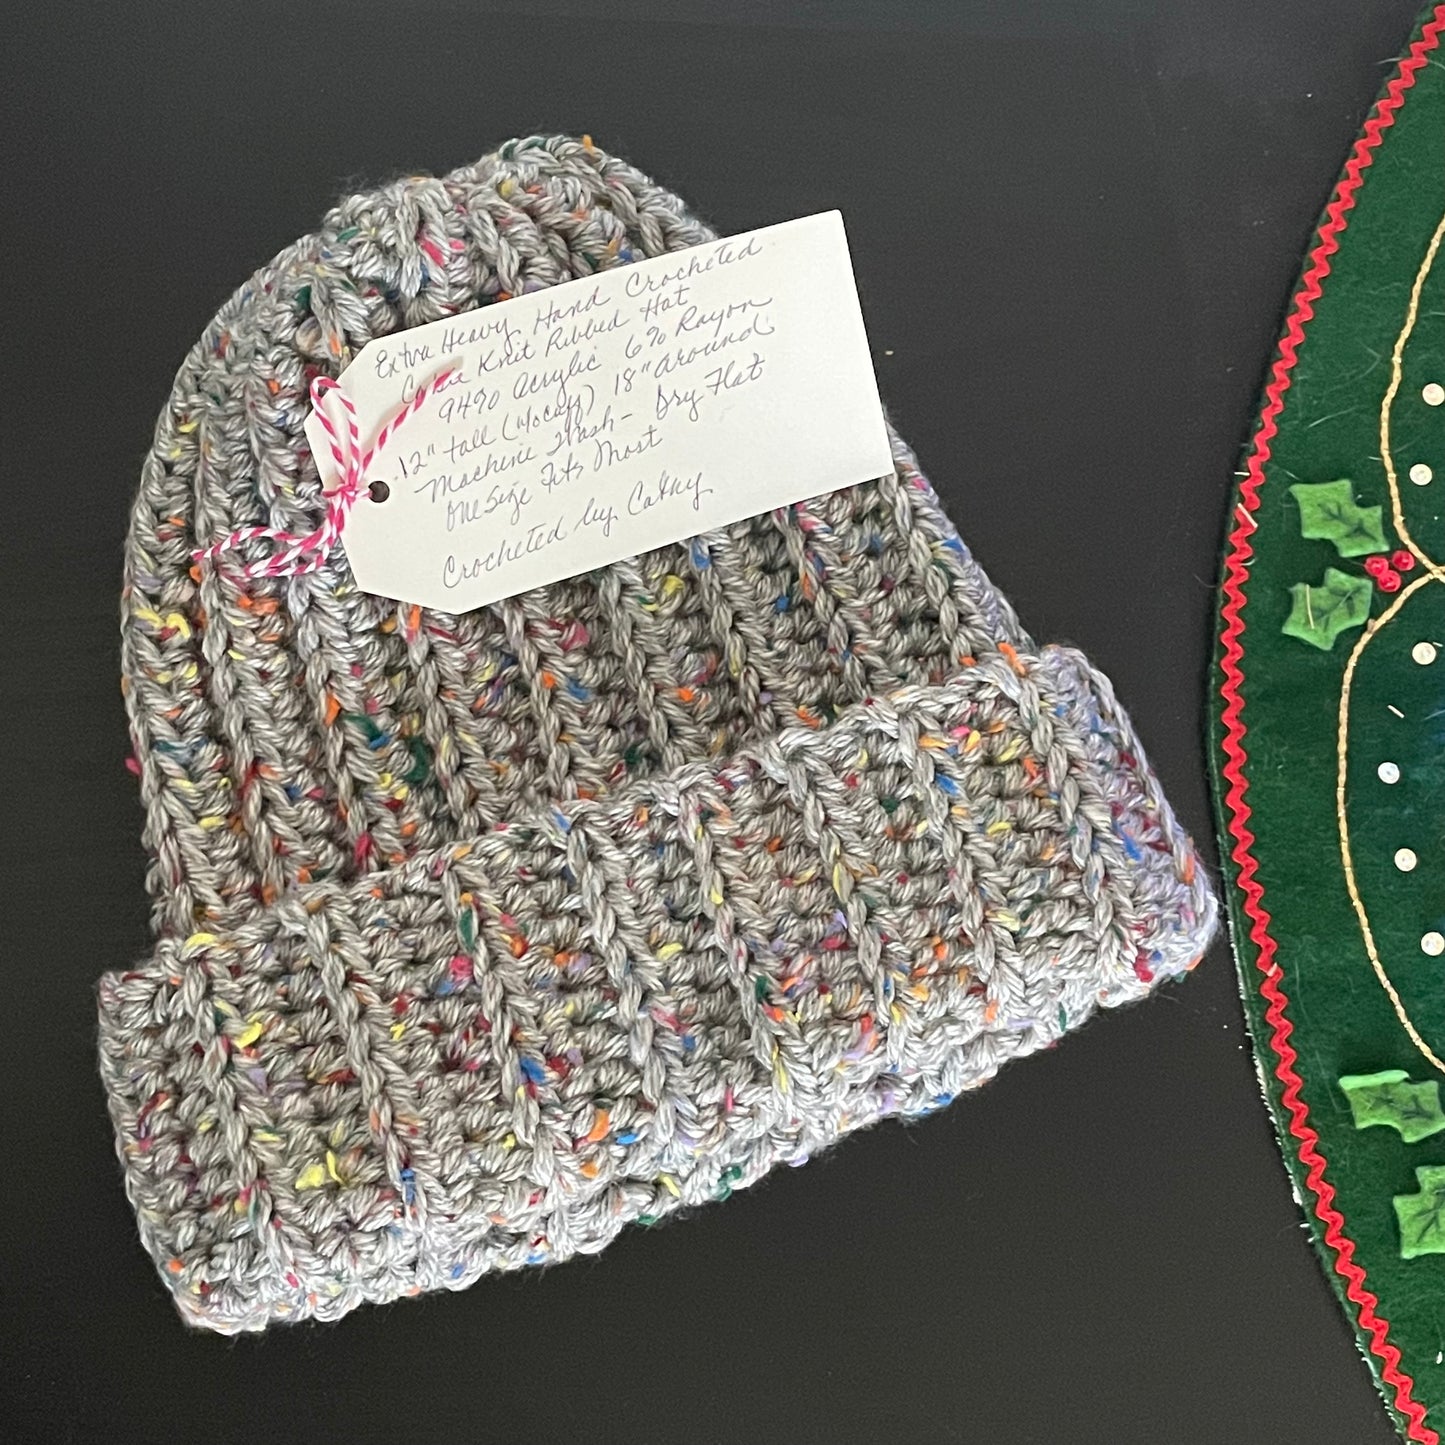 Extra Warm Ribbed Cable Knit Hat Silver & Speckled Rainbow Hand Crocheted Beanie Winter Unisex Outdoor Stretch Adjustable CuffExtra Warm Ribbed Cable Knit Hat Silver & Speckled Rainbow Hand Crocheted Beanie Winter Unisex Outdoor Stretch Adjustable Cuff